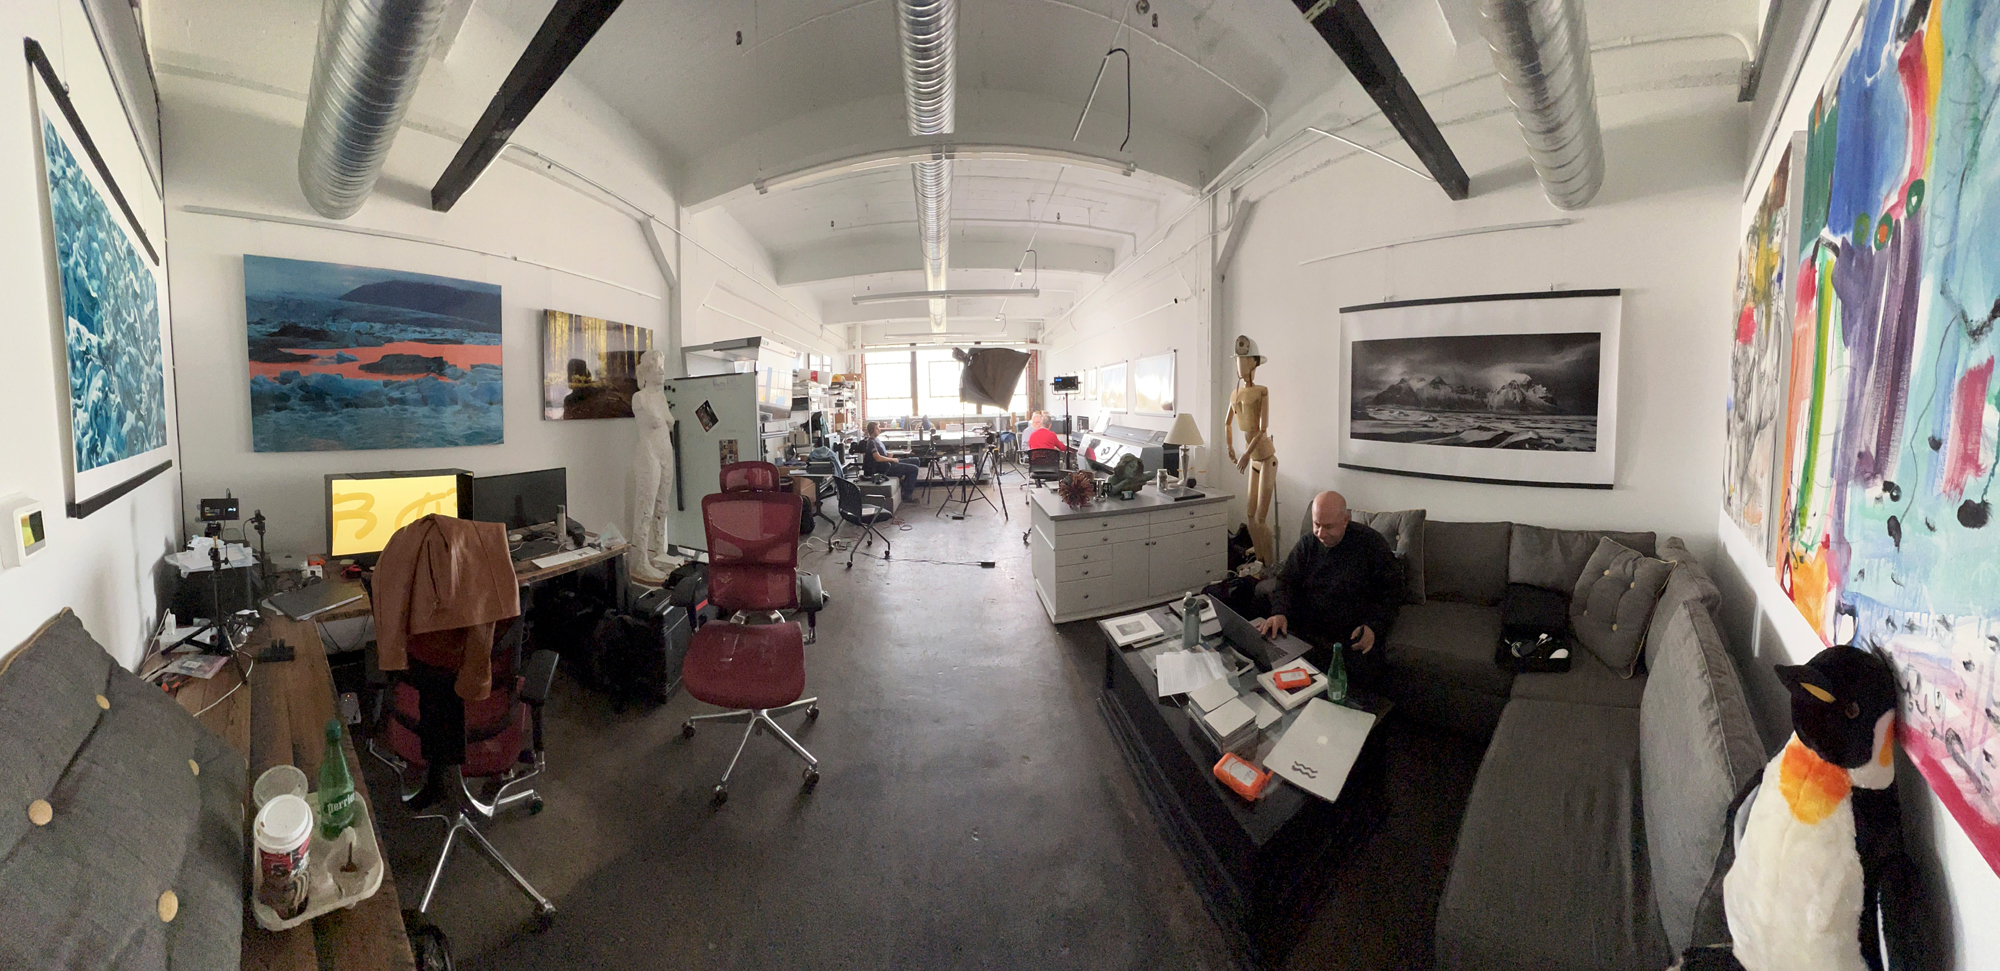 A pano of the studio